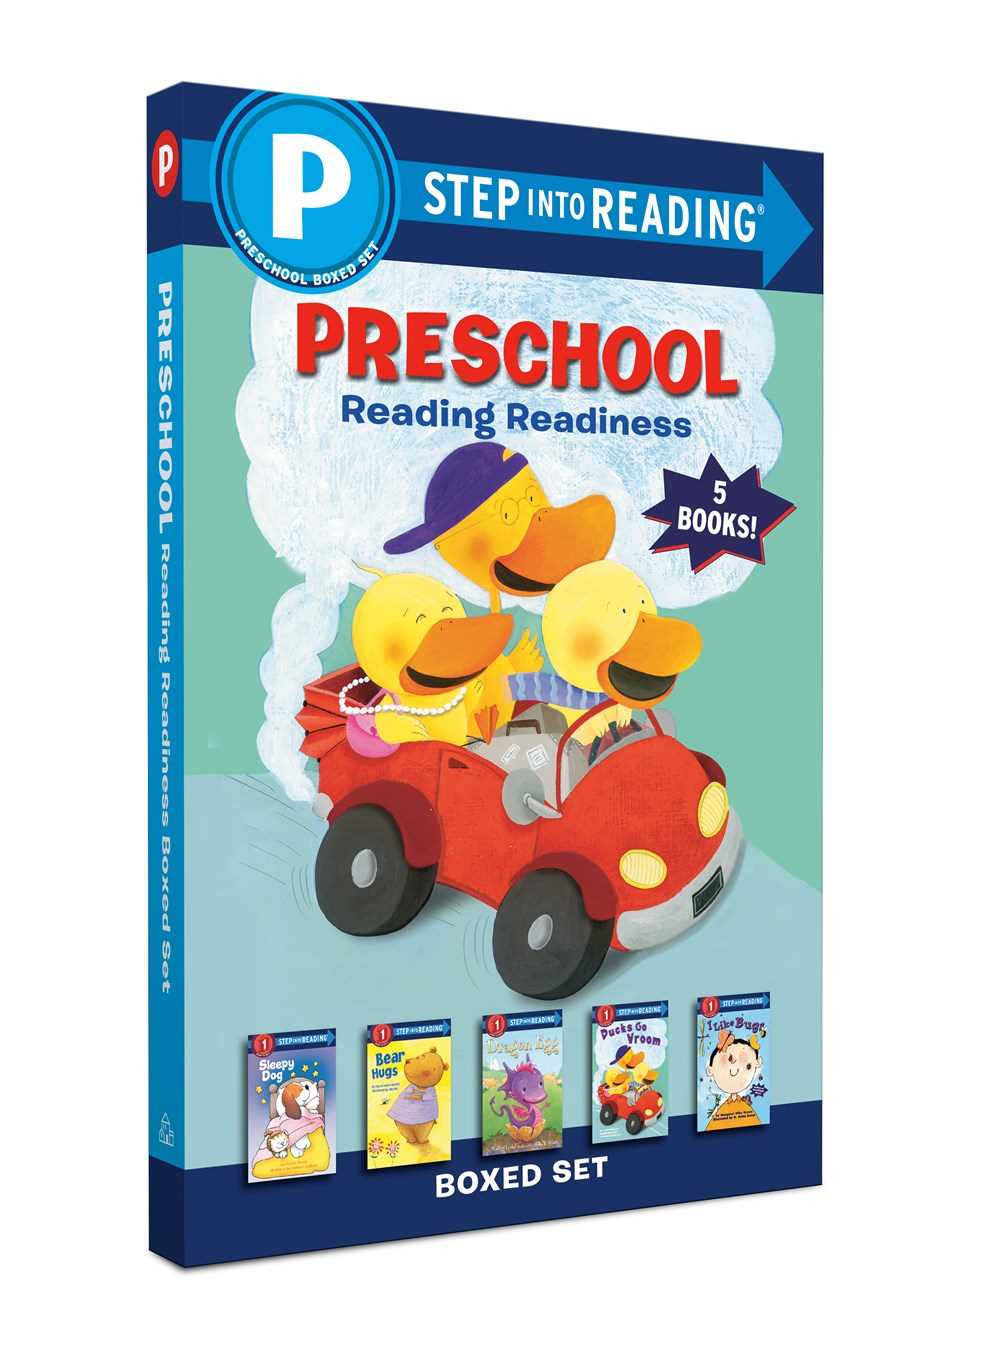 Step into Reading: Preschool Reading Readiness Boxed Set